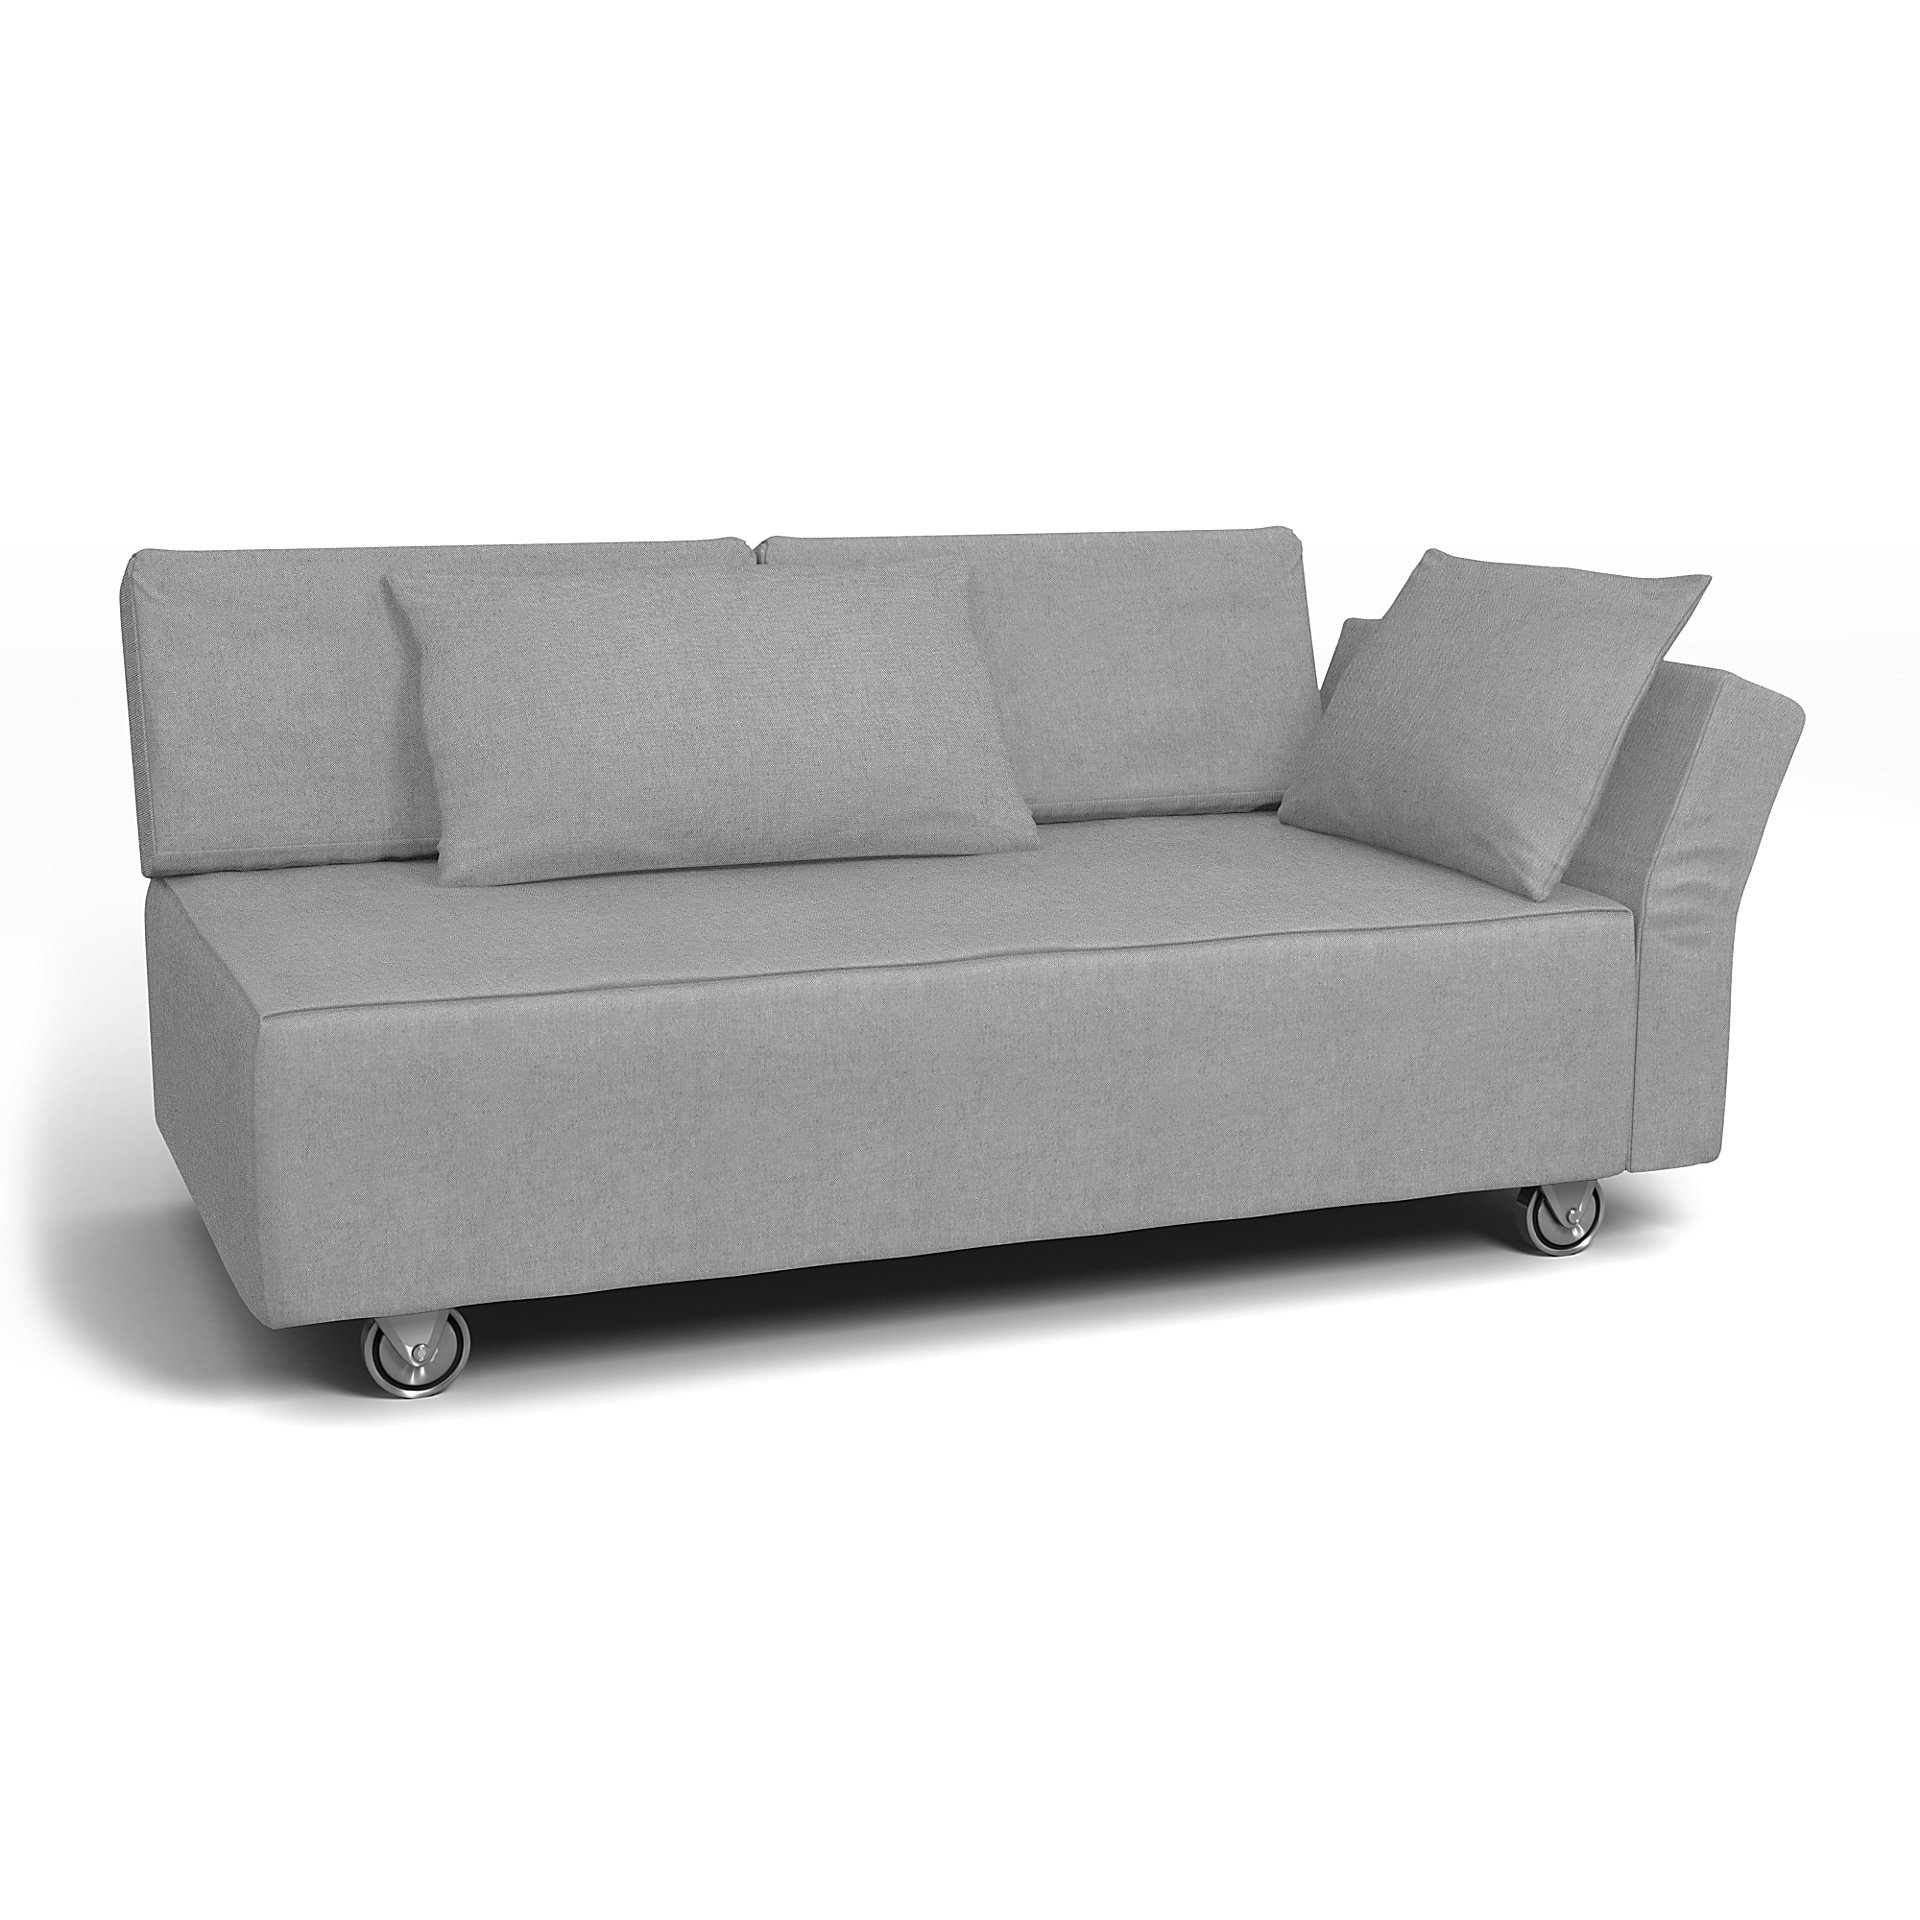 IKEA - Falsterbo 2 Seat Sofa with Right Arm Cover, Graphite, Linen - Bemz